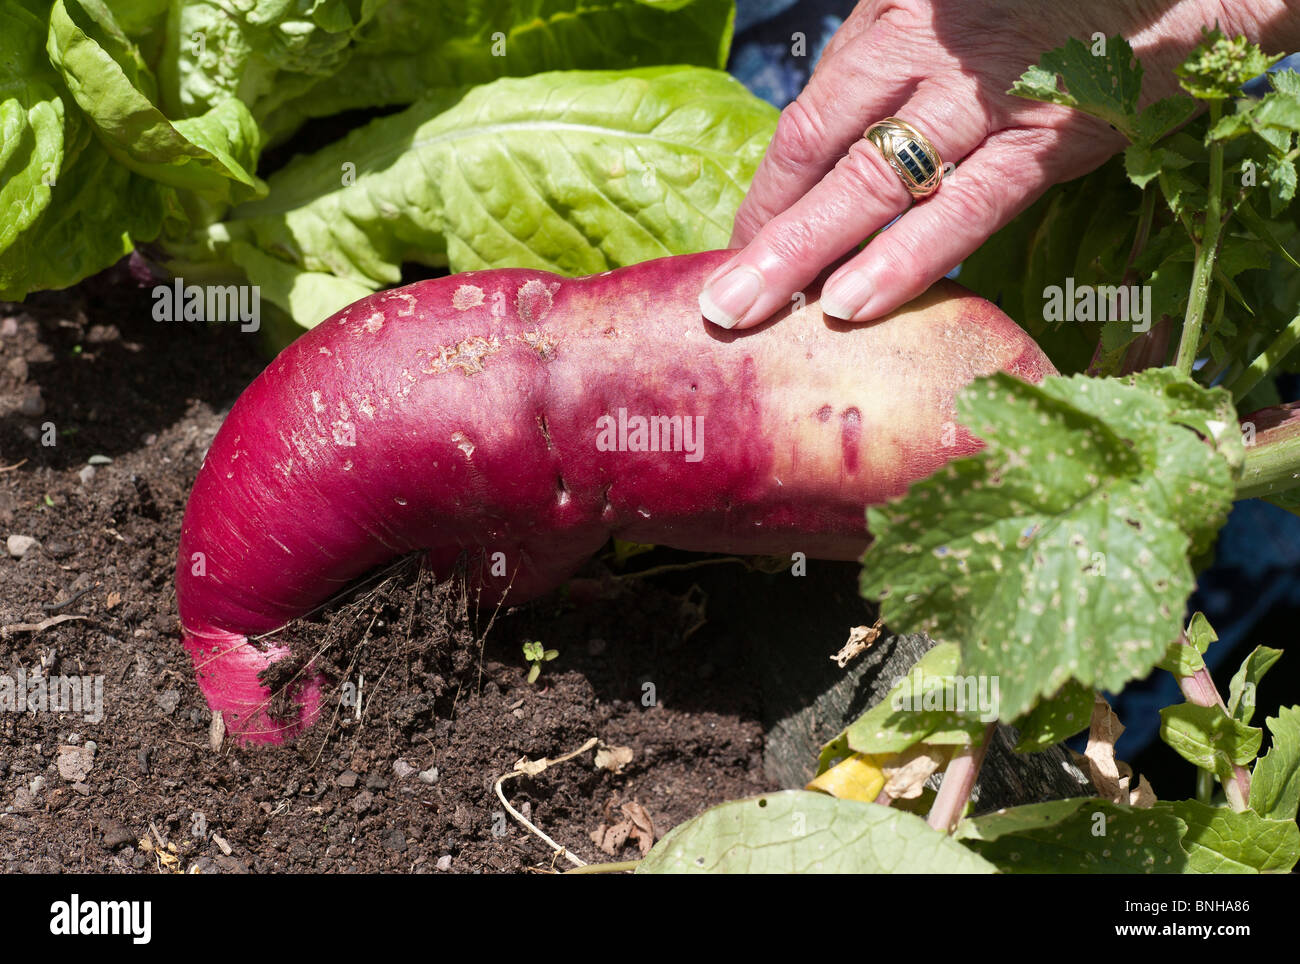 Giant vegetable radish growing in a container in July Stock Photo